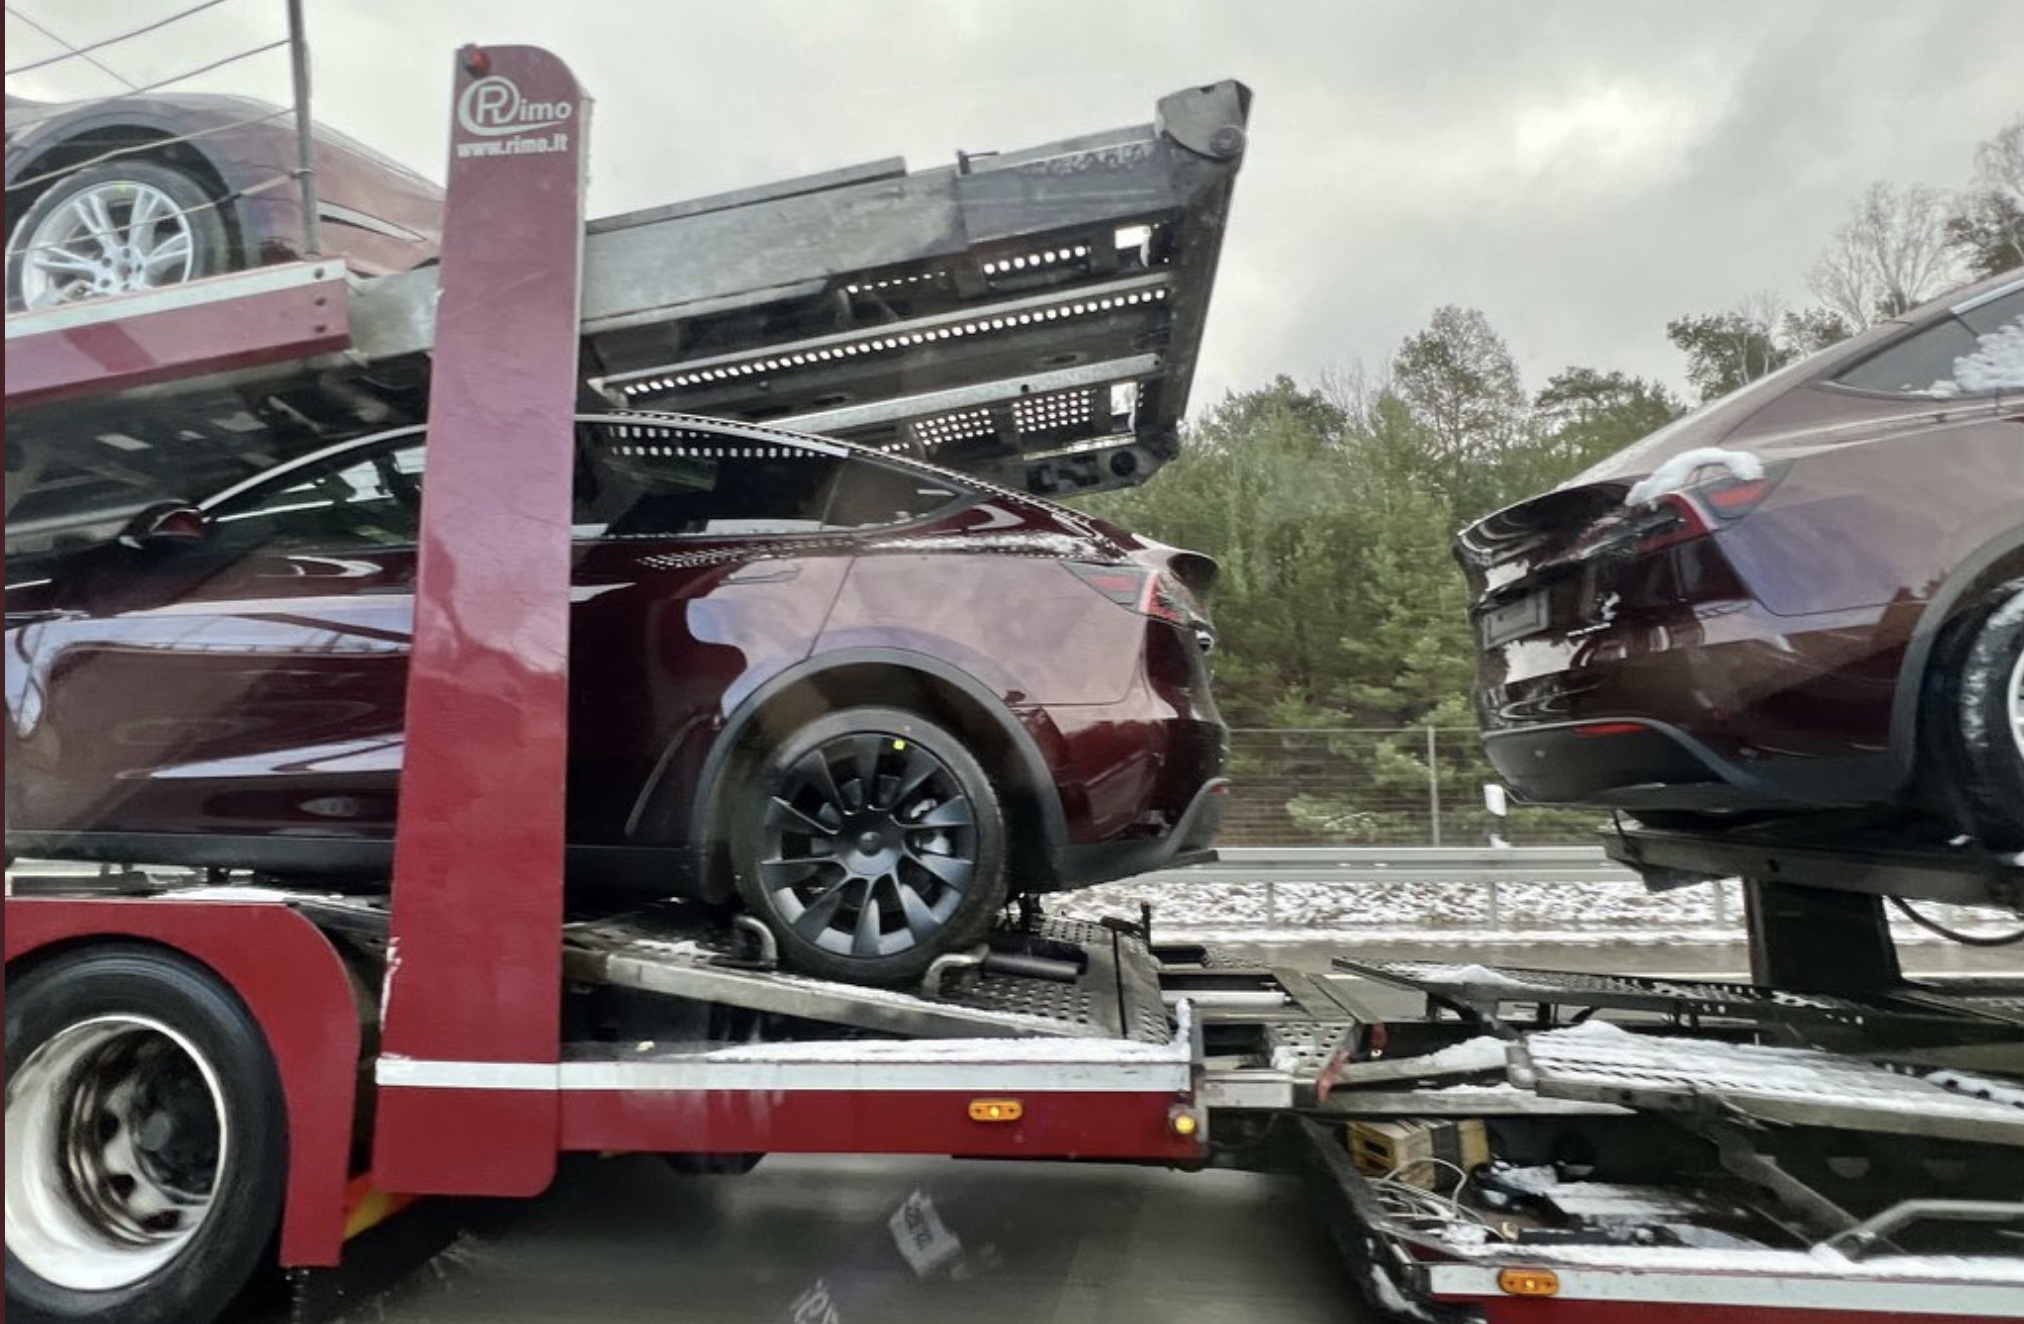 Tesla Giga Berlin ships out Midnight Cherry Red Model Ys for deliveries in Europe